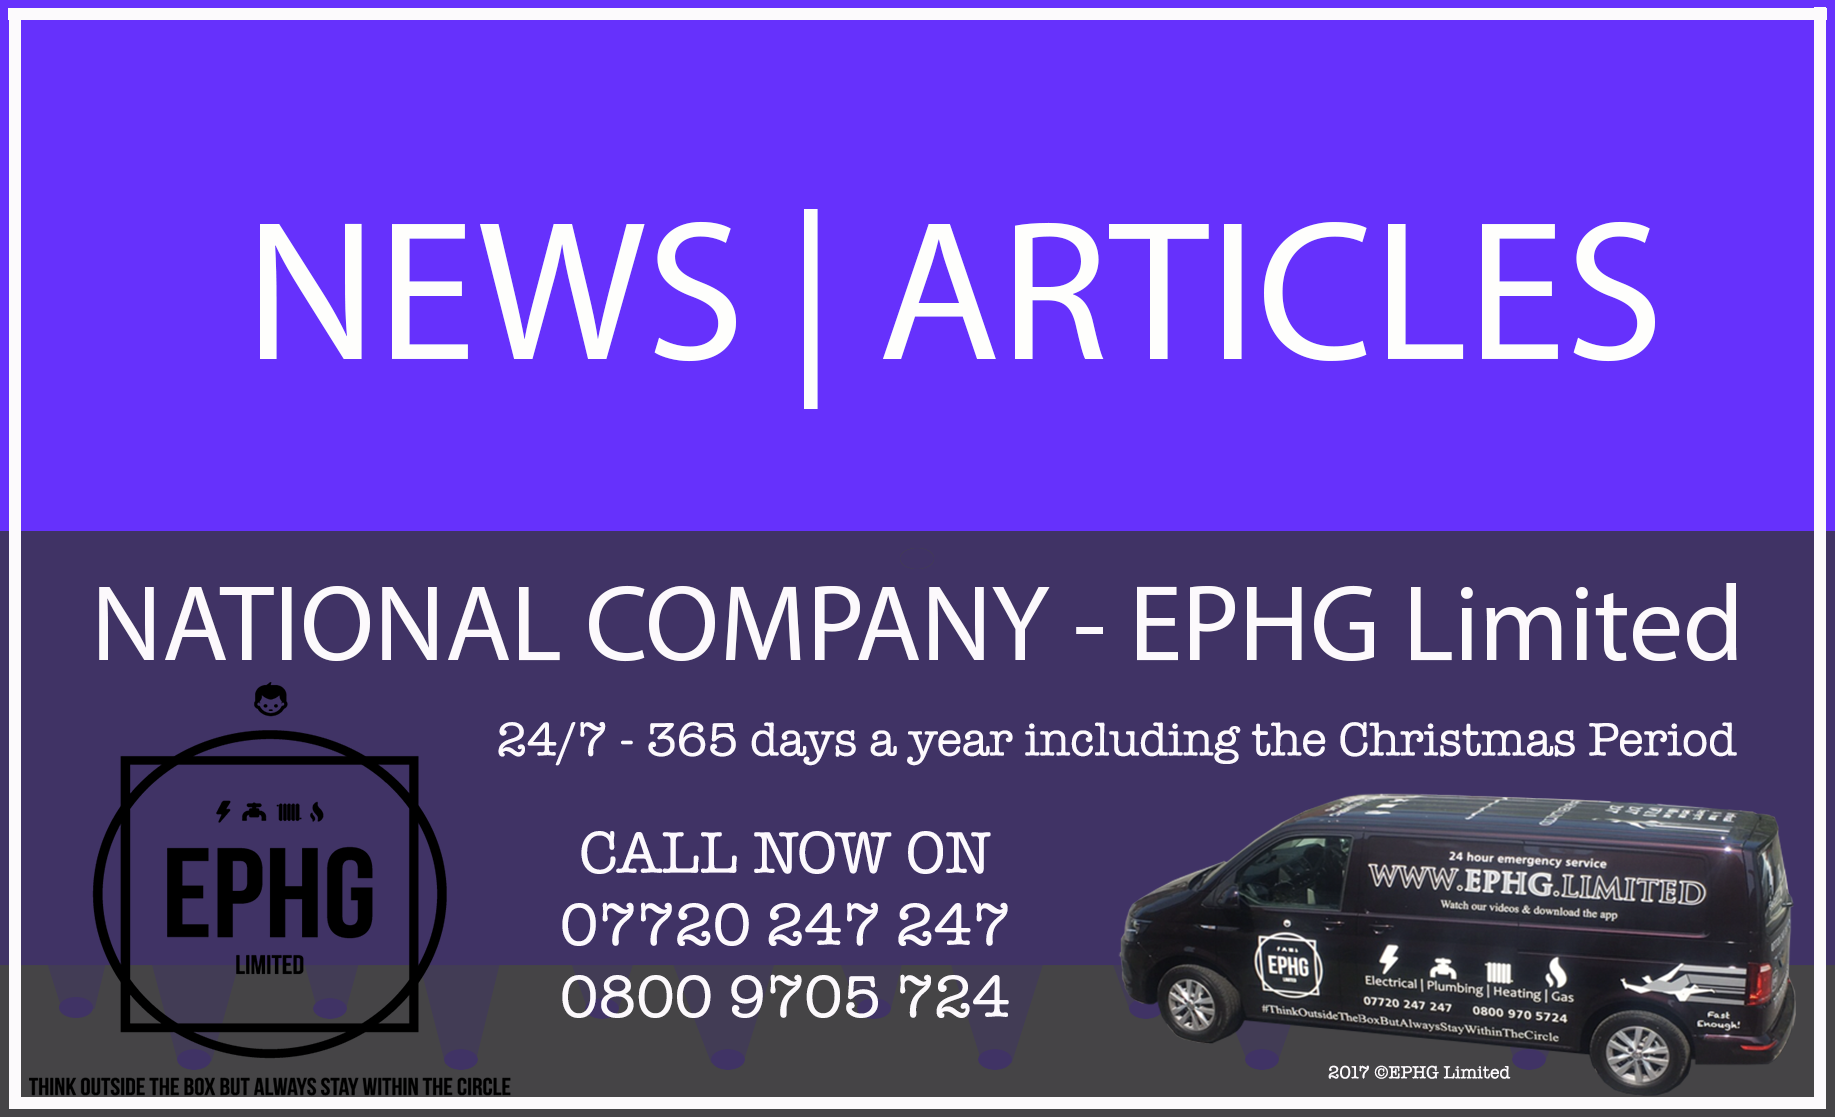 EPHG News And Articles